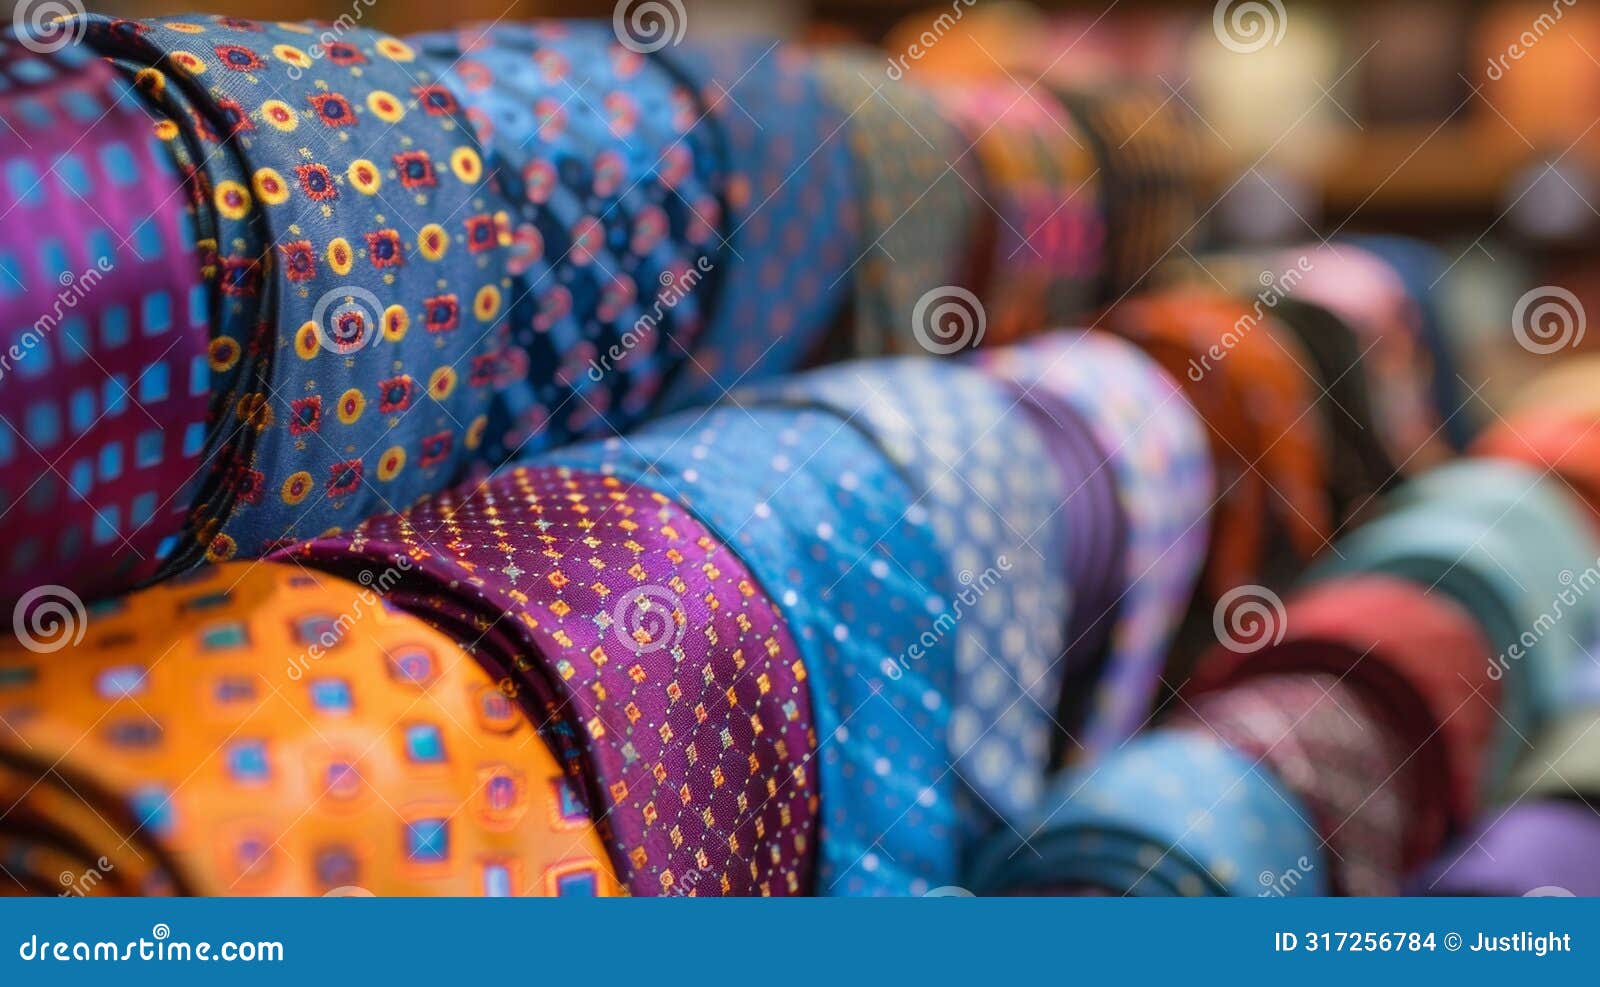 a group of colorful ties displayed in a store ready to be bought as fathers day presents